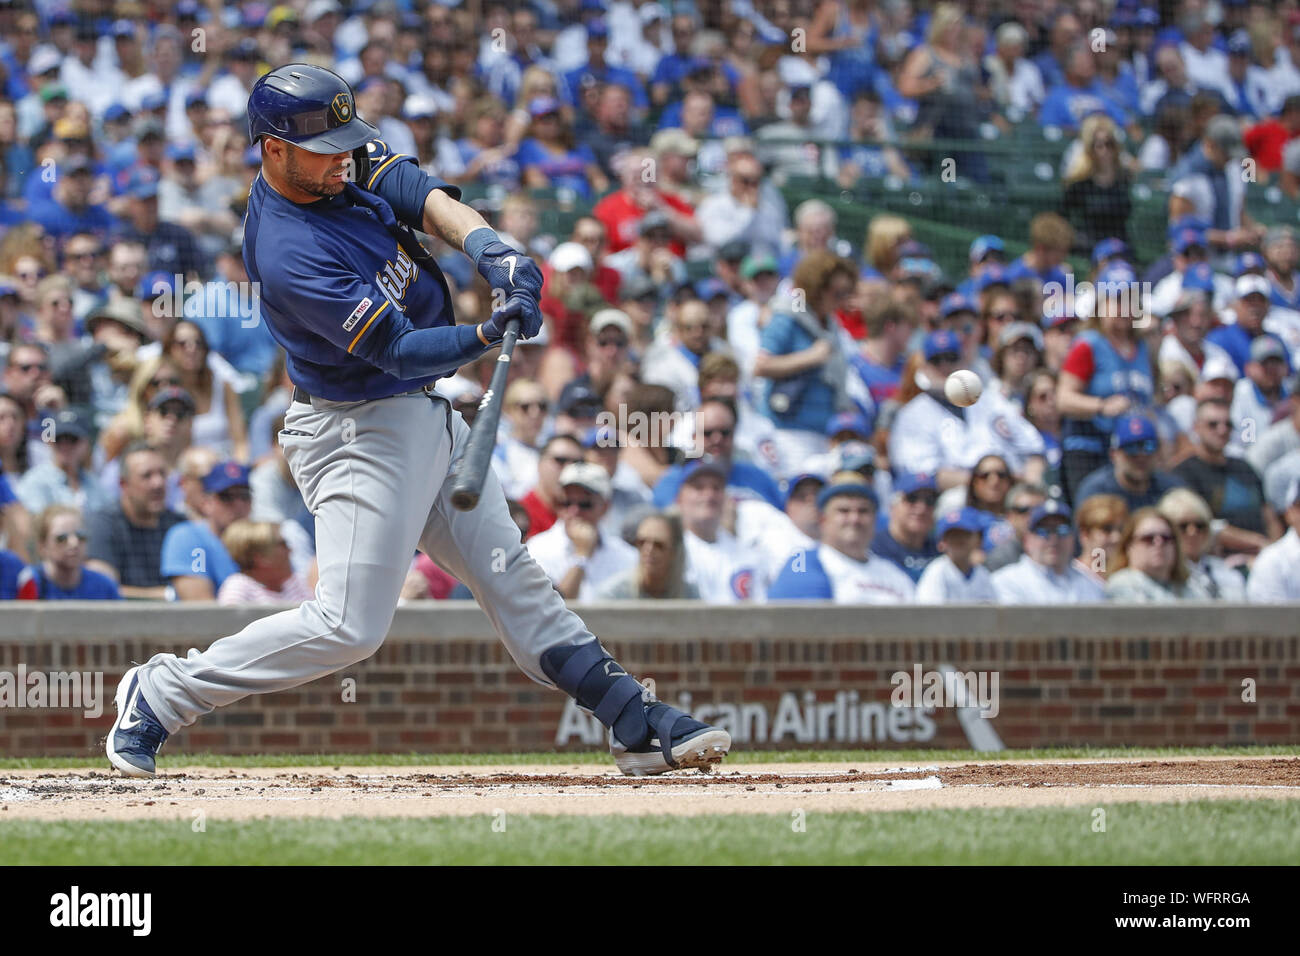 Chicago, USA. 31st Aug, 2019. Milwaukee Brewers catcher Manny Pina hits two-run single against the Chicago Cubs in the first inning at Wrigley Field on Saturday, August 31, 2019 in Chicago. Credit: UPI/Alamy Live News Stock Photo